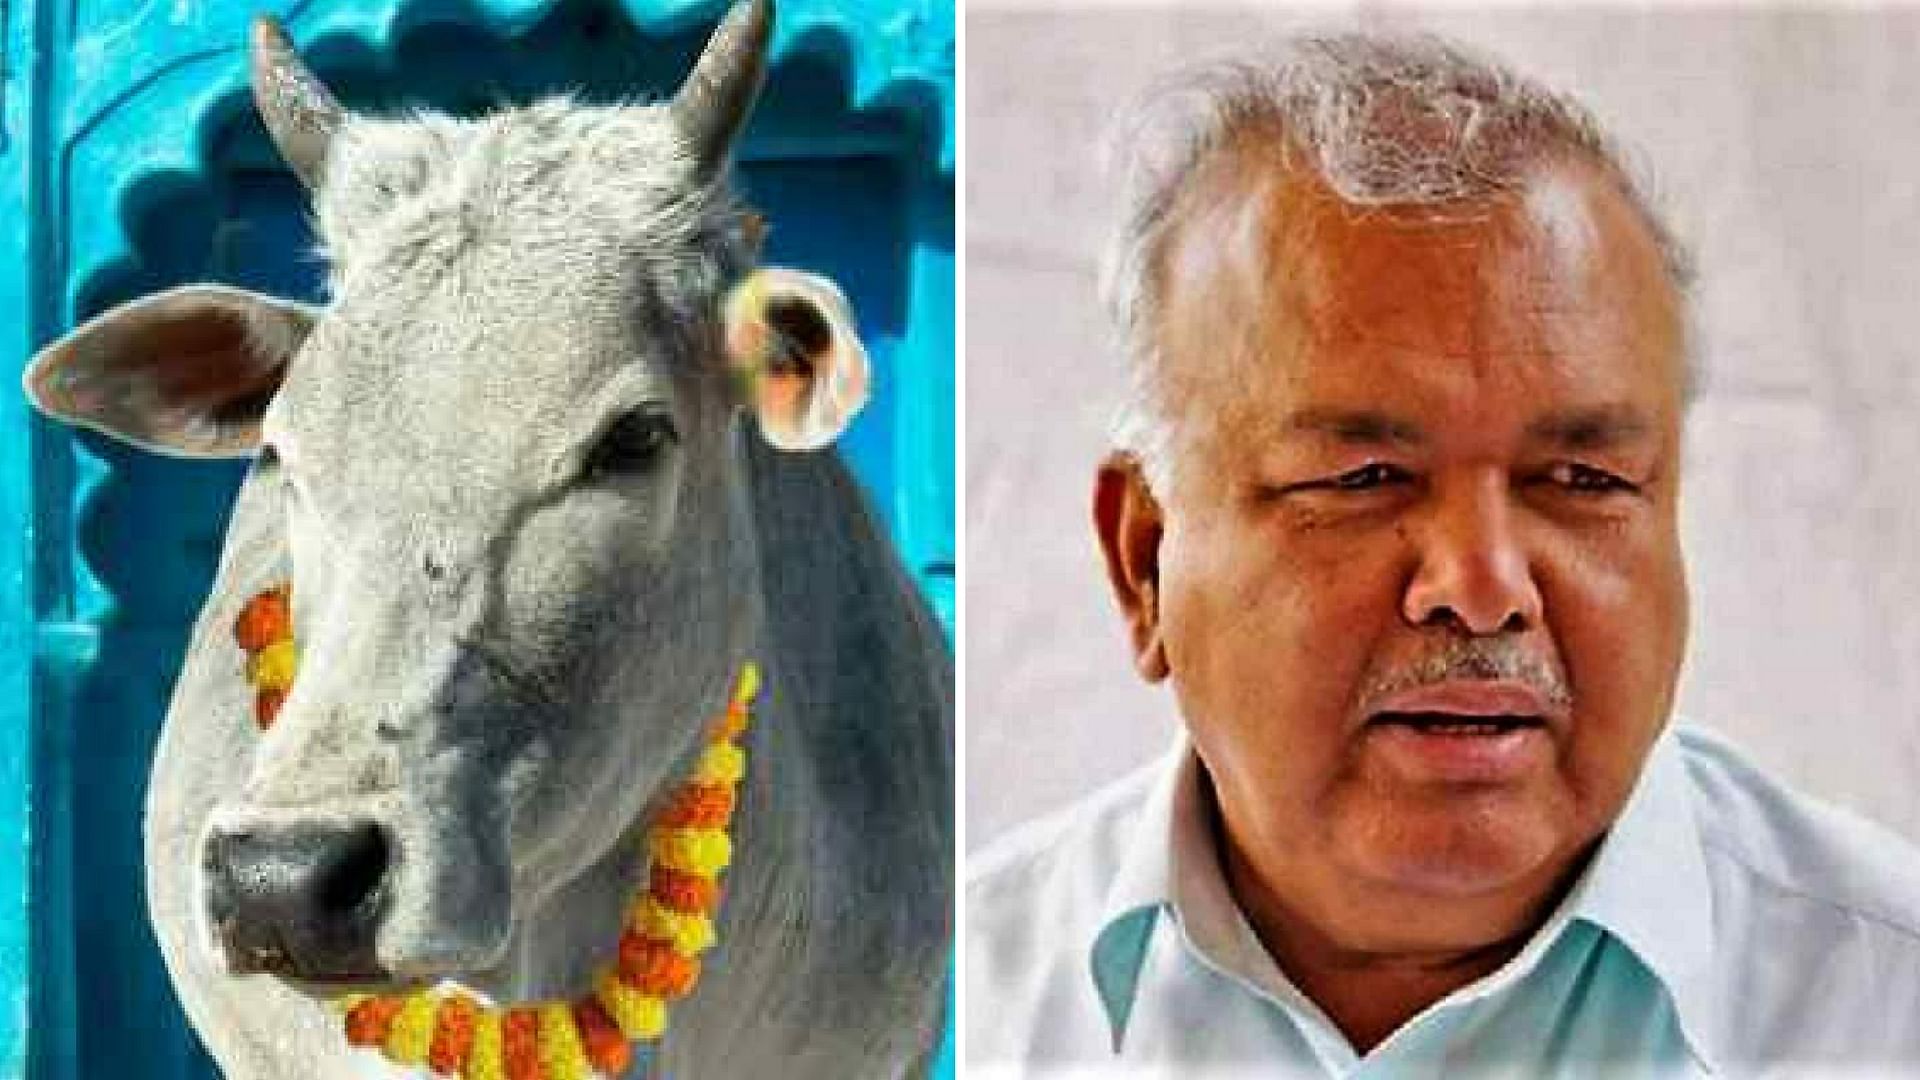 Ramalinga Reddy reiterated Eshwarappa’s stance and called for a ban on all kinds of animal slaughter.